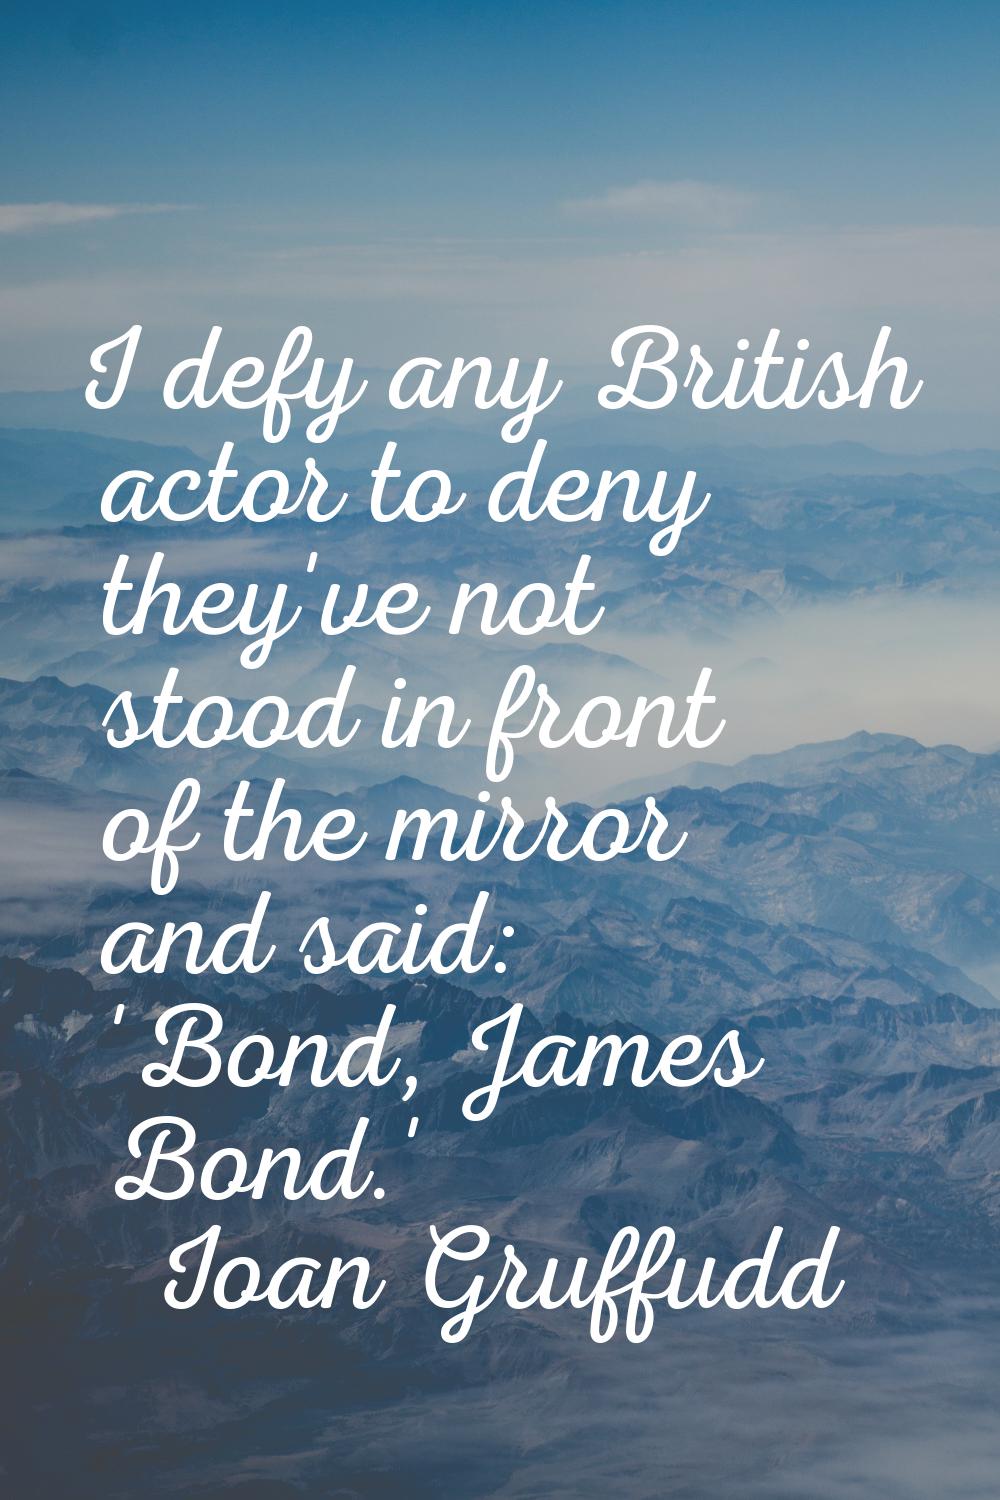 I defy any British actor to deny they've not stood in front of the mirror and said: 'Bond, James Bo